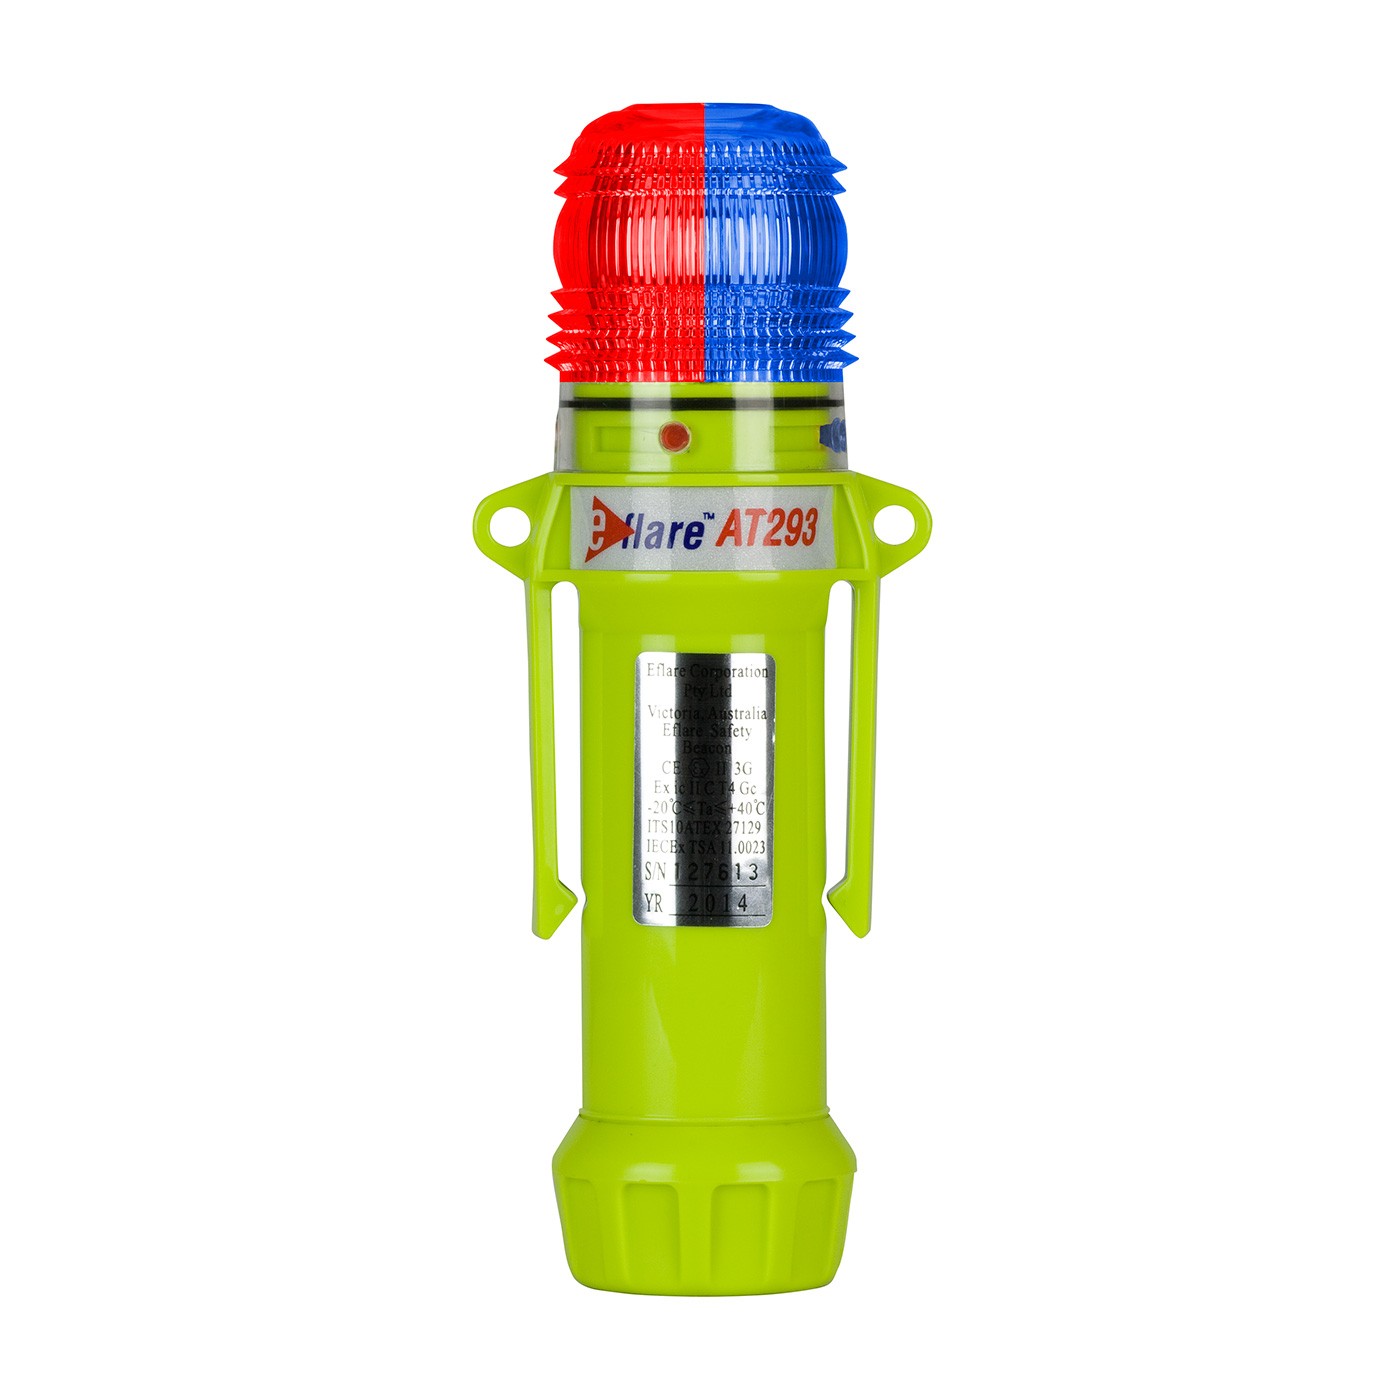 Eflare™ 8" Safety & Emergency Beacon - Alternating Red/Blue  (#939-AT293-R/B)